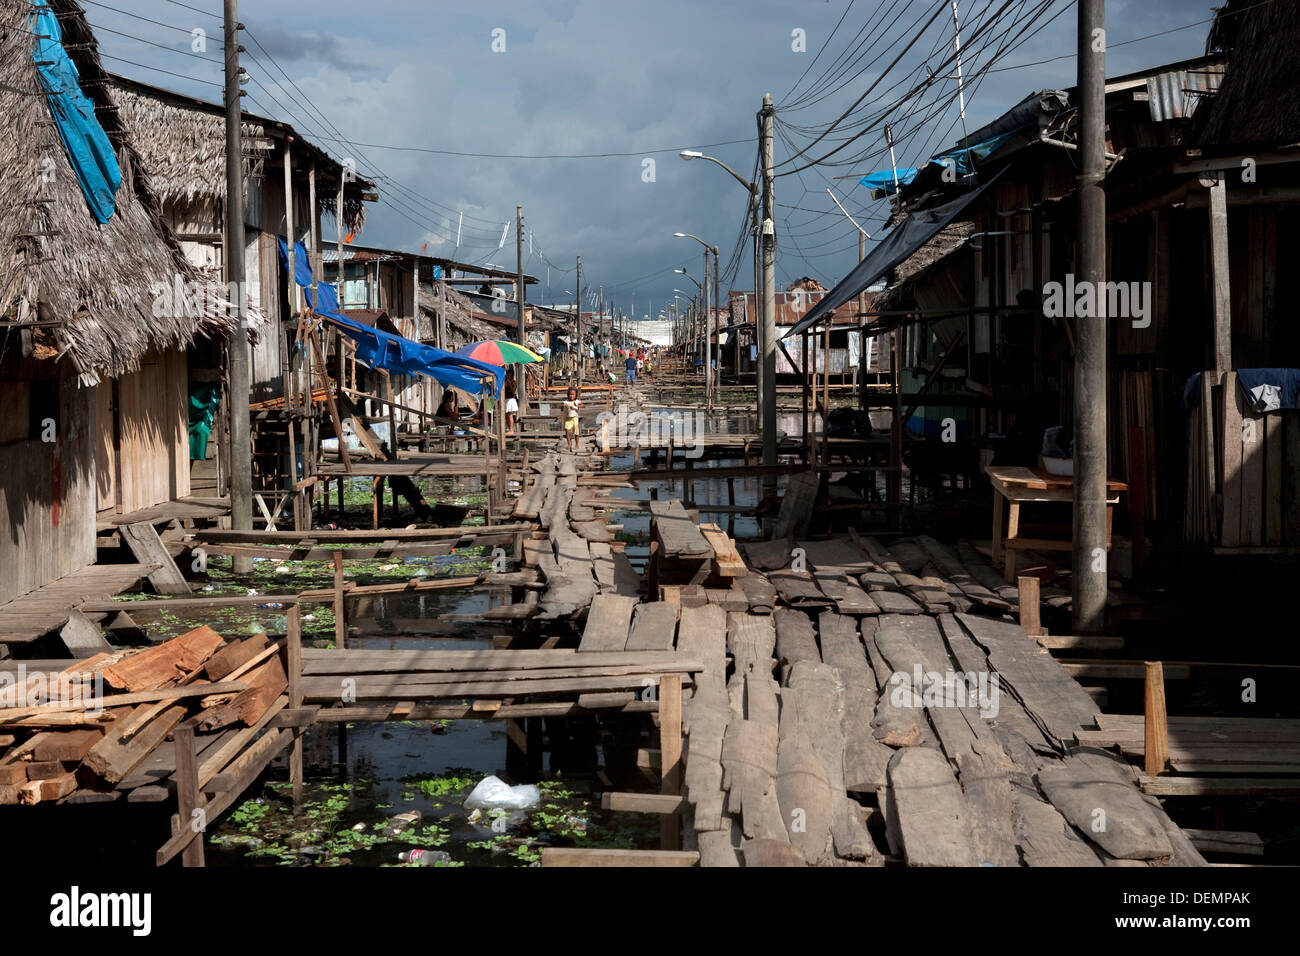 Wooden walkways to prevent floodwaters of the Amazon River in one of the poorest neighborhoods in Iquitos. Stock Photo